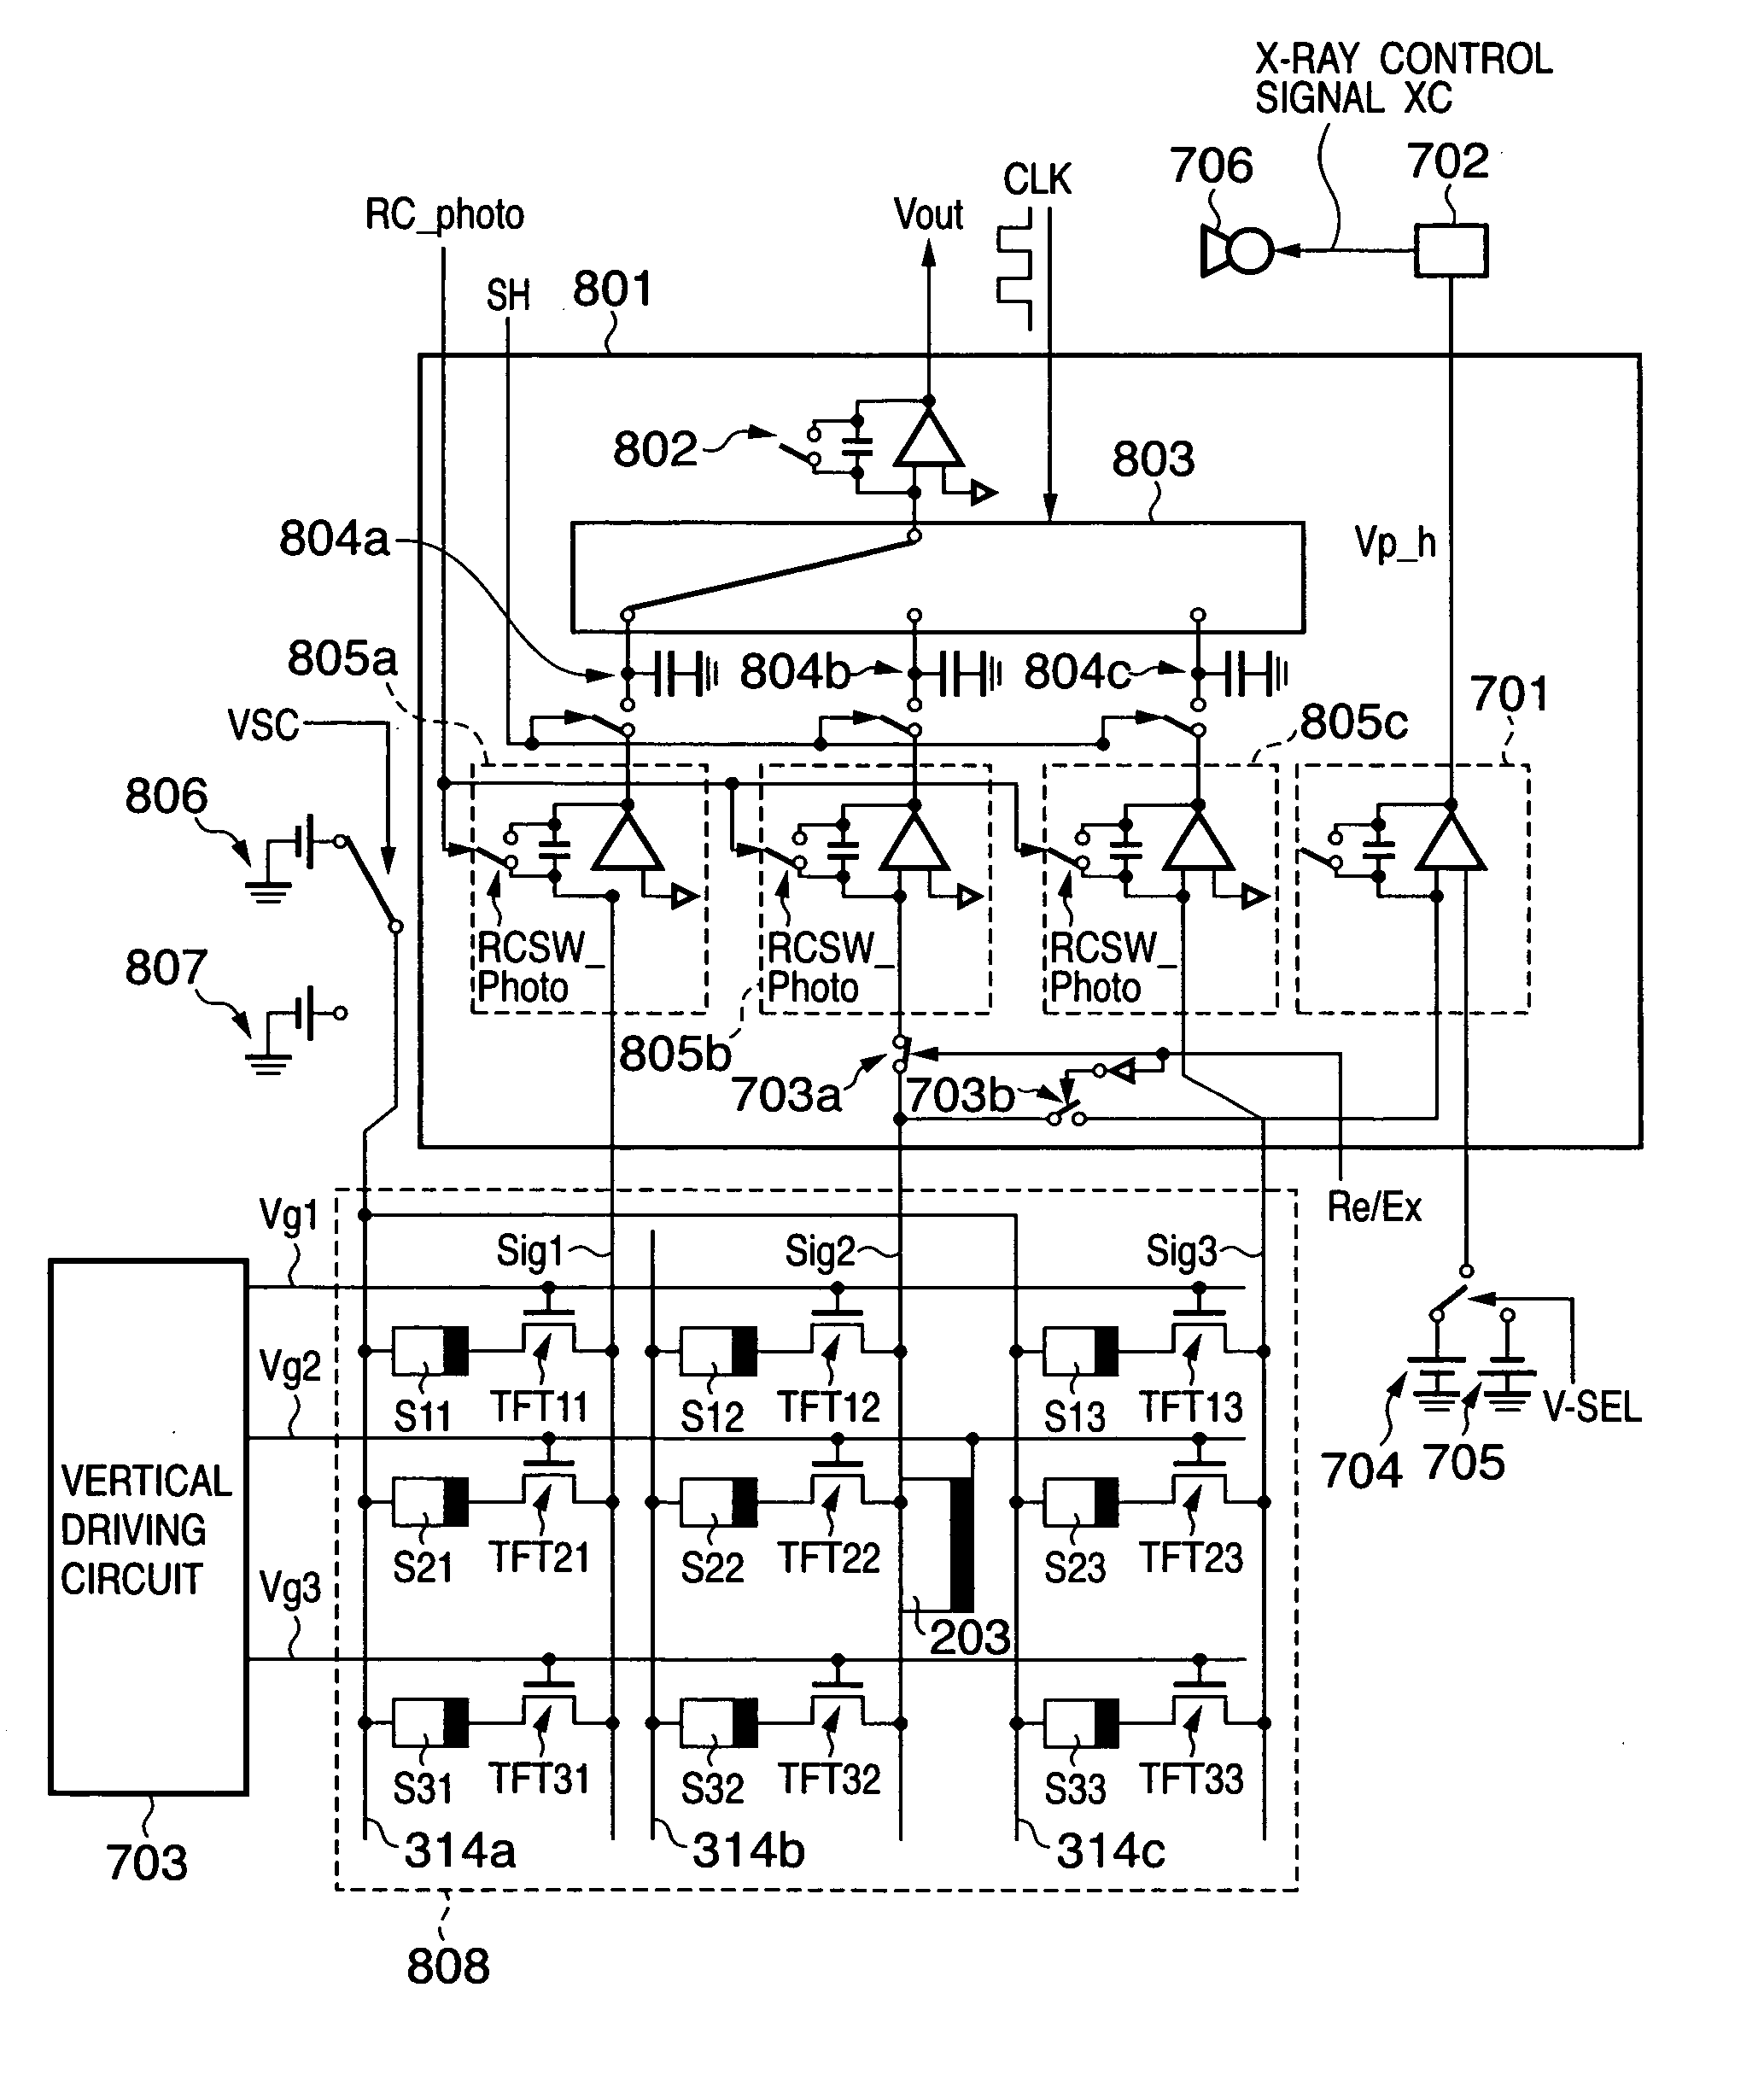 Photoelectric conversion apparatus, manufacturing method therefor, and X-ray imaging apparatus